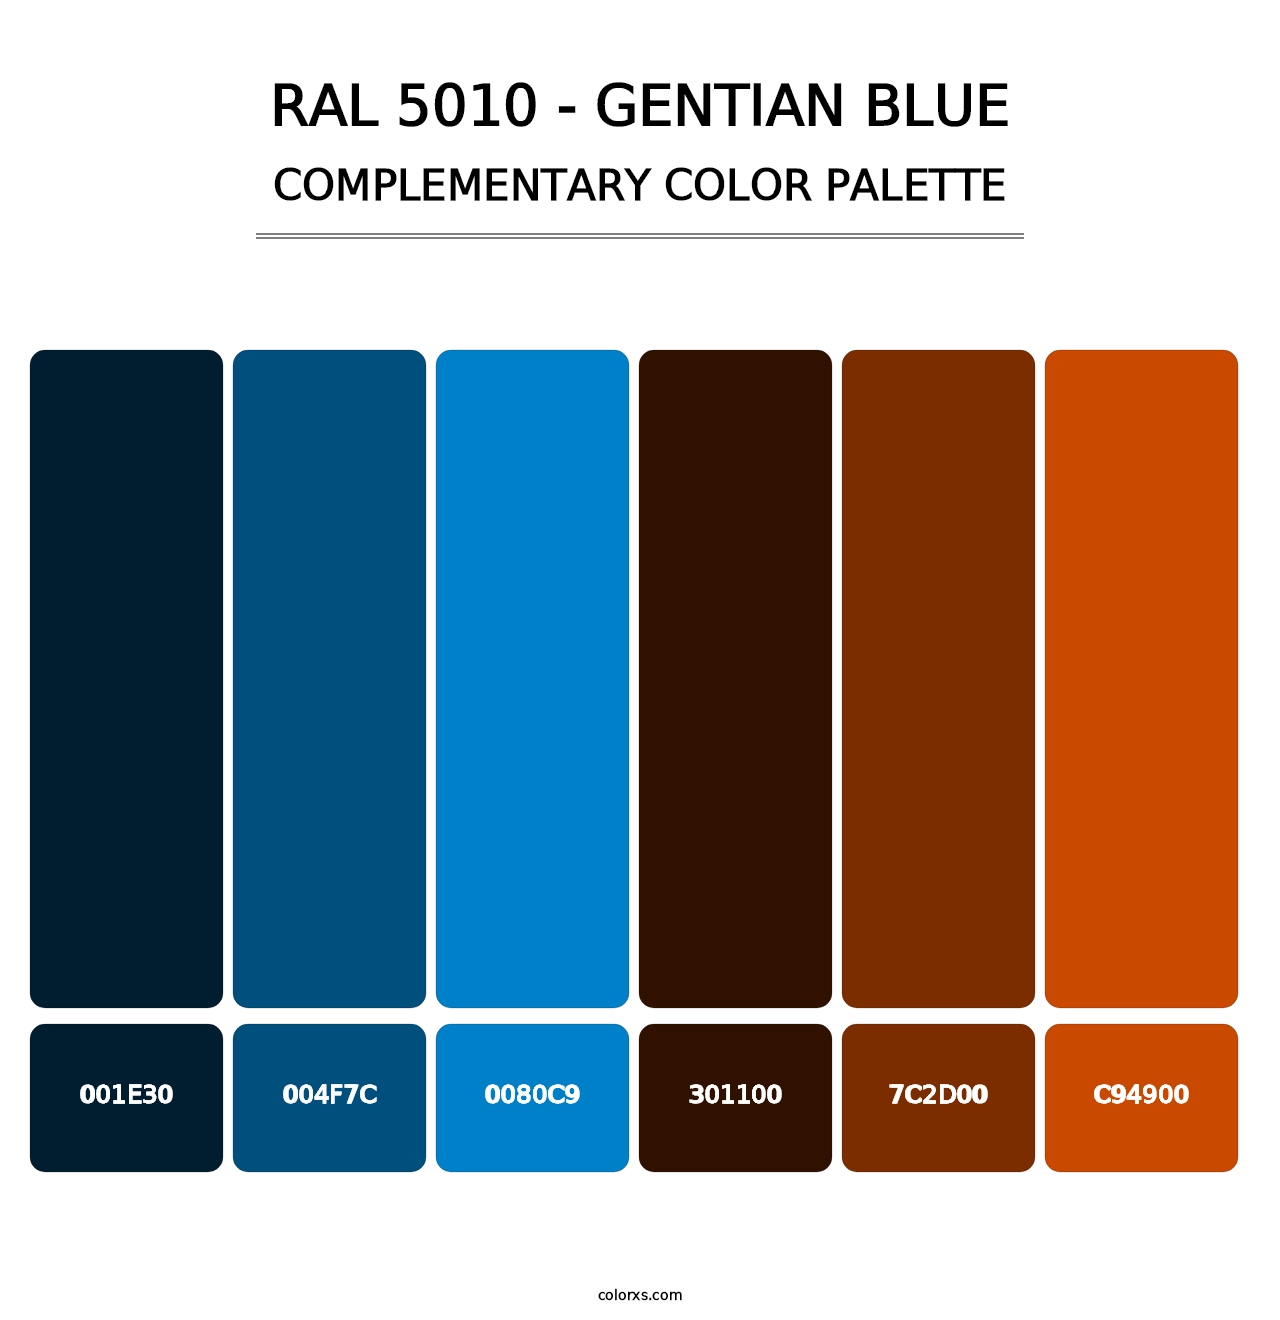 RAL 5010 - Gentian Blue - Complementary Color Palette